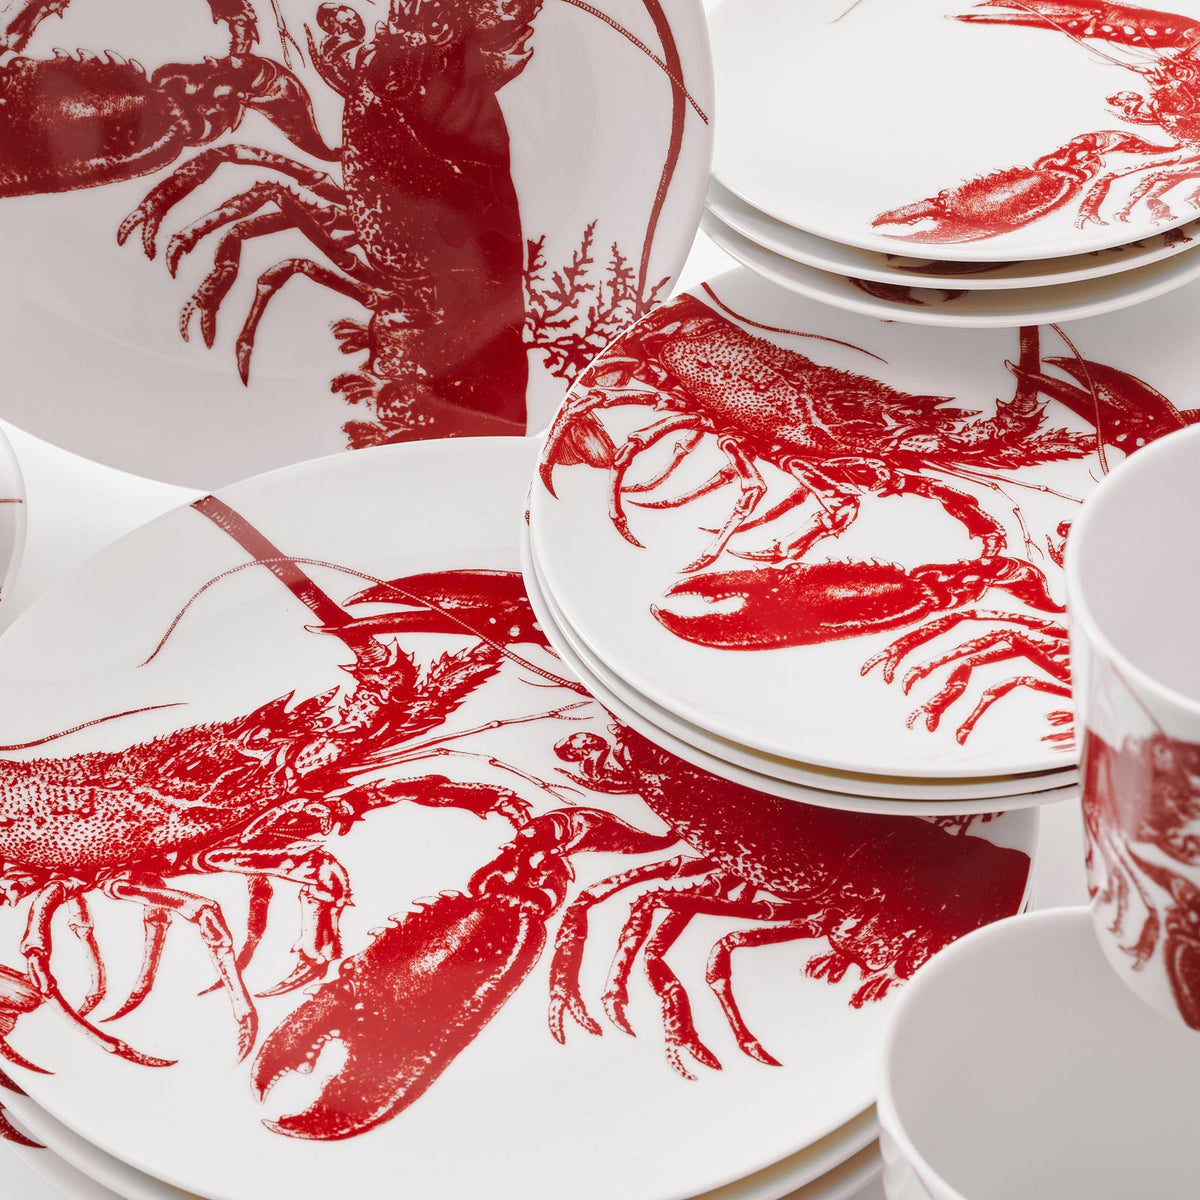 A coastal-style set of Lobsters Table for 4 red and white dinner plates with lobsters on them by Caskata.